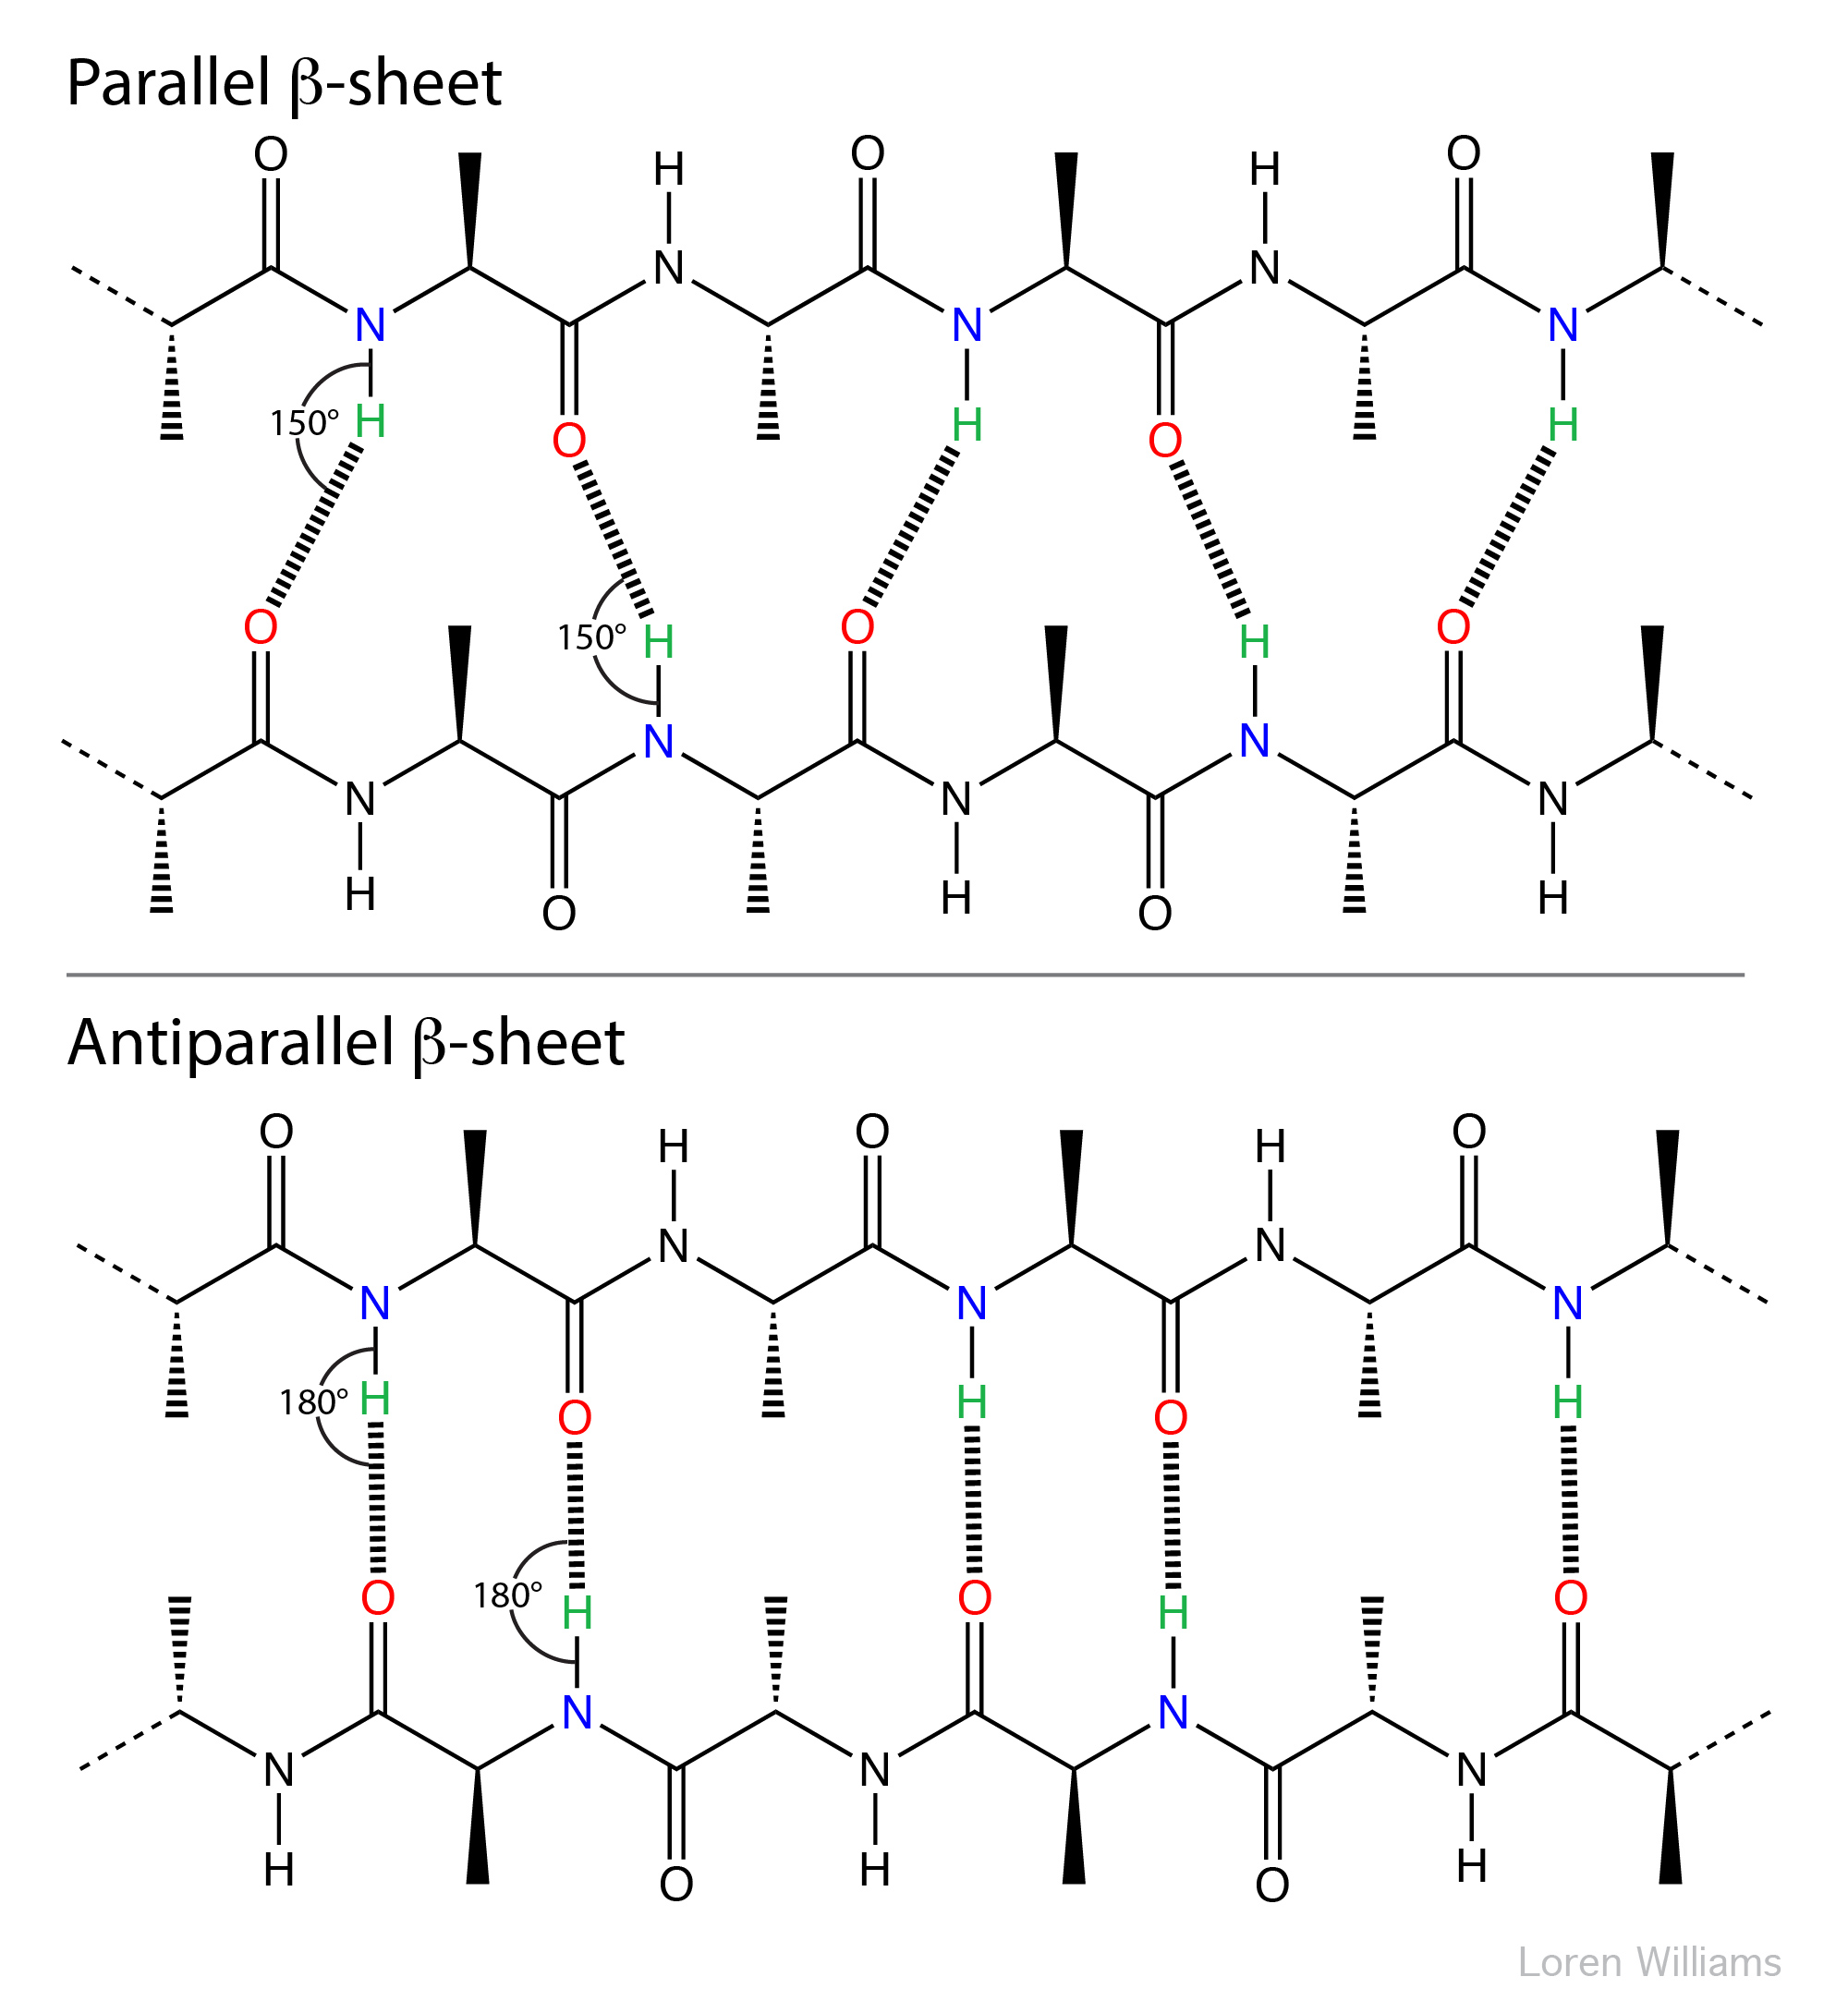 parallel and antiparallel beta-sheet